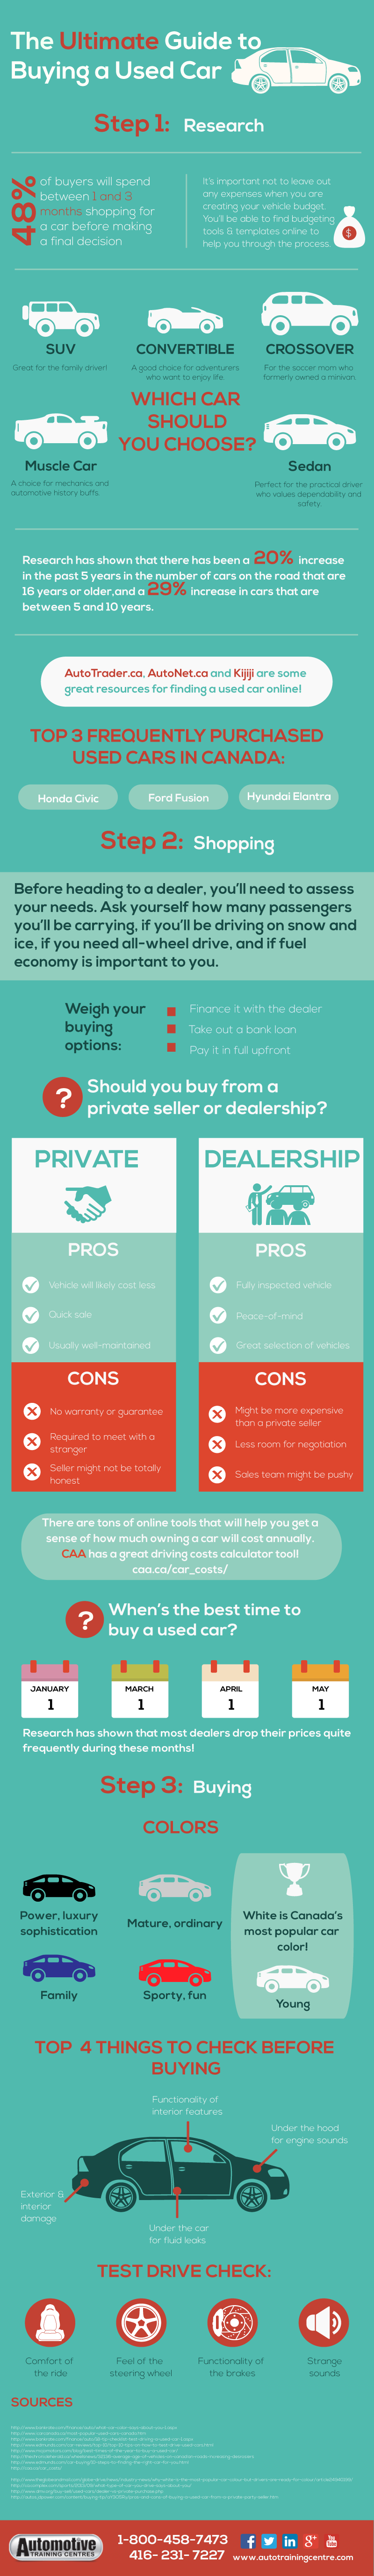 Guide-To-Buying-Used-Car--ATC-Toronto-Infographic